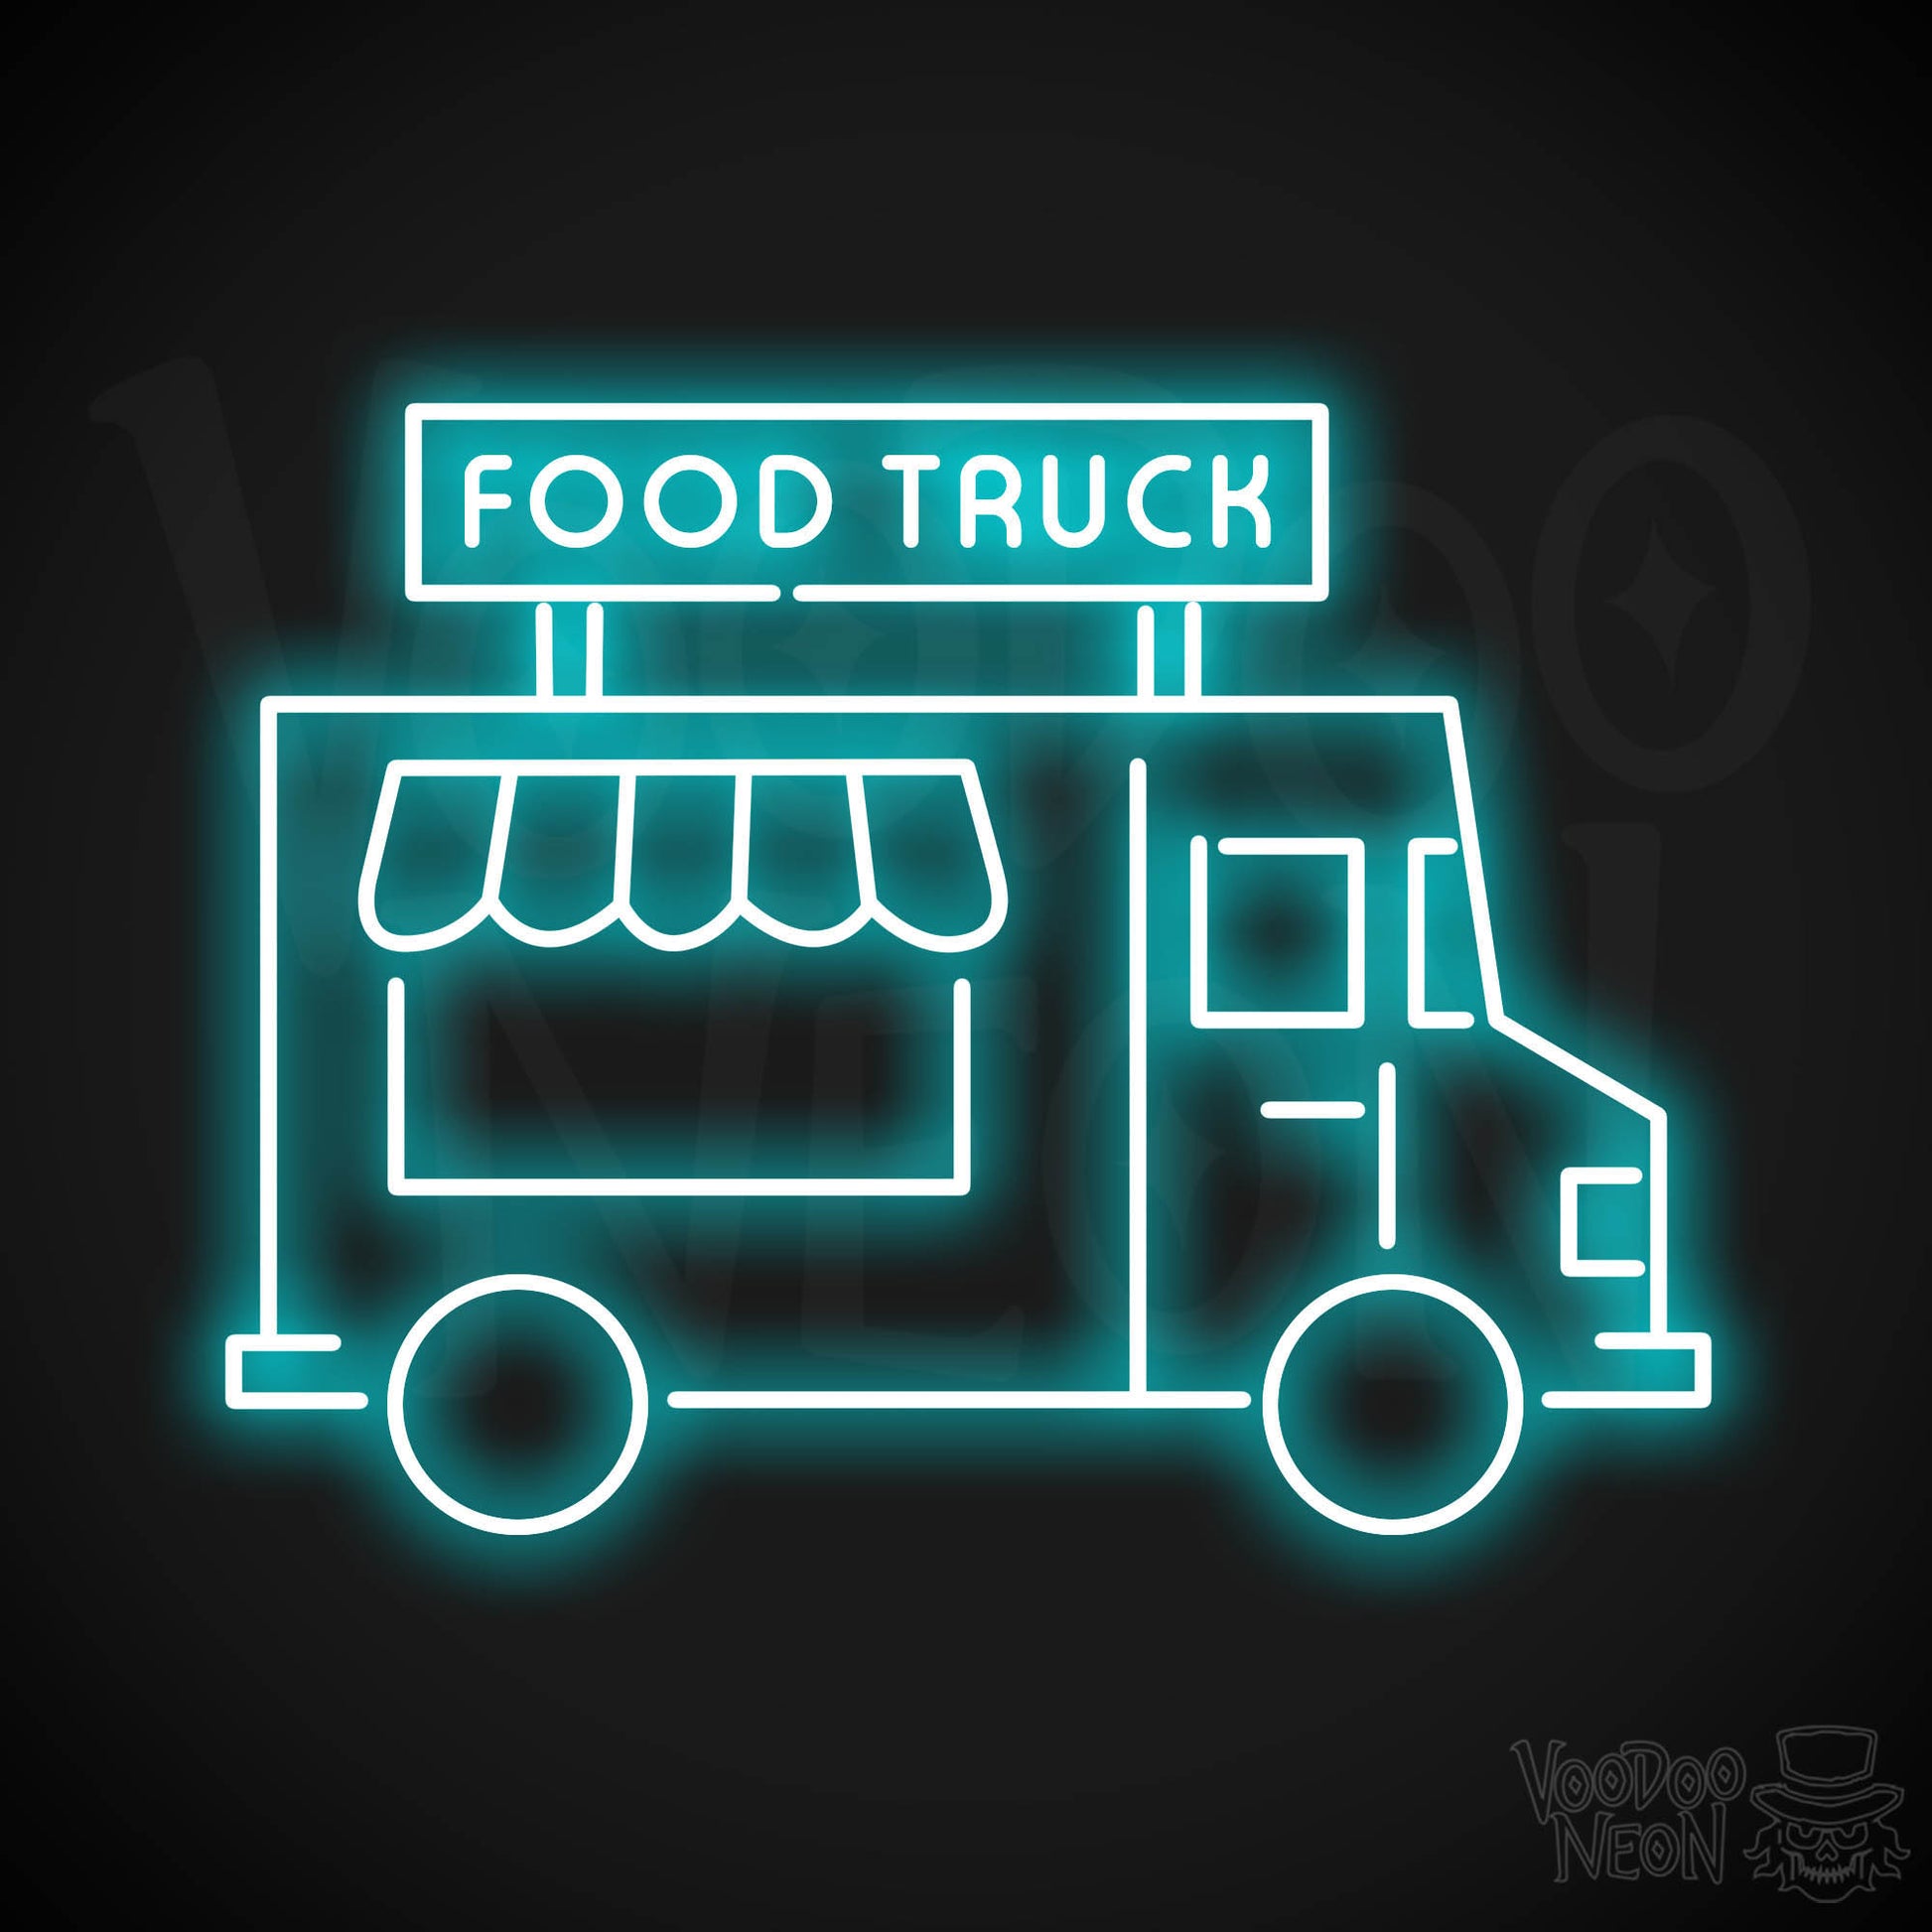 Food Truck LED Neon - Ice Blue